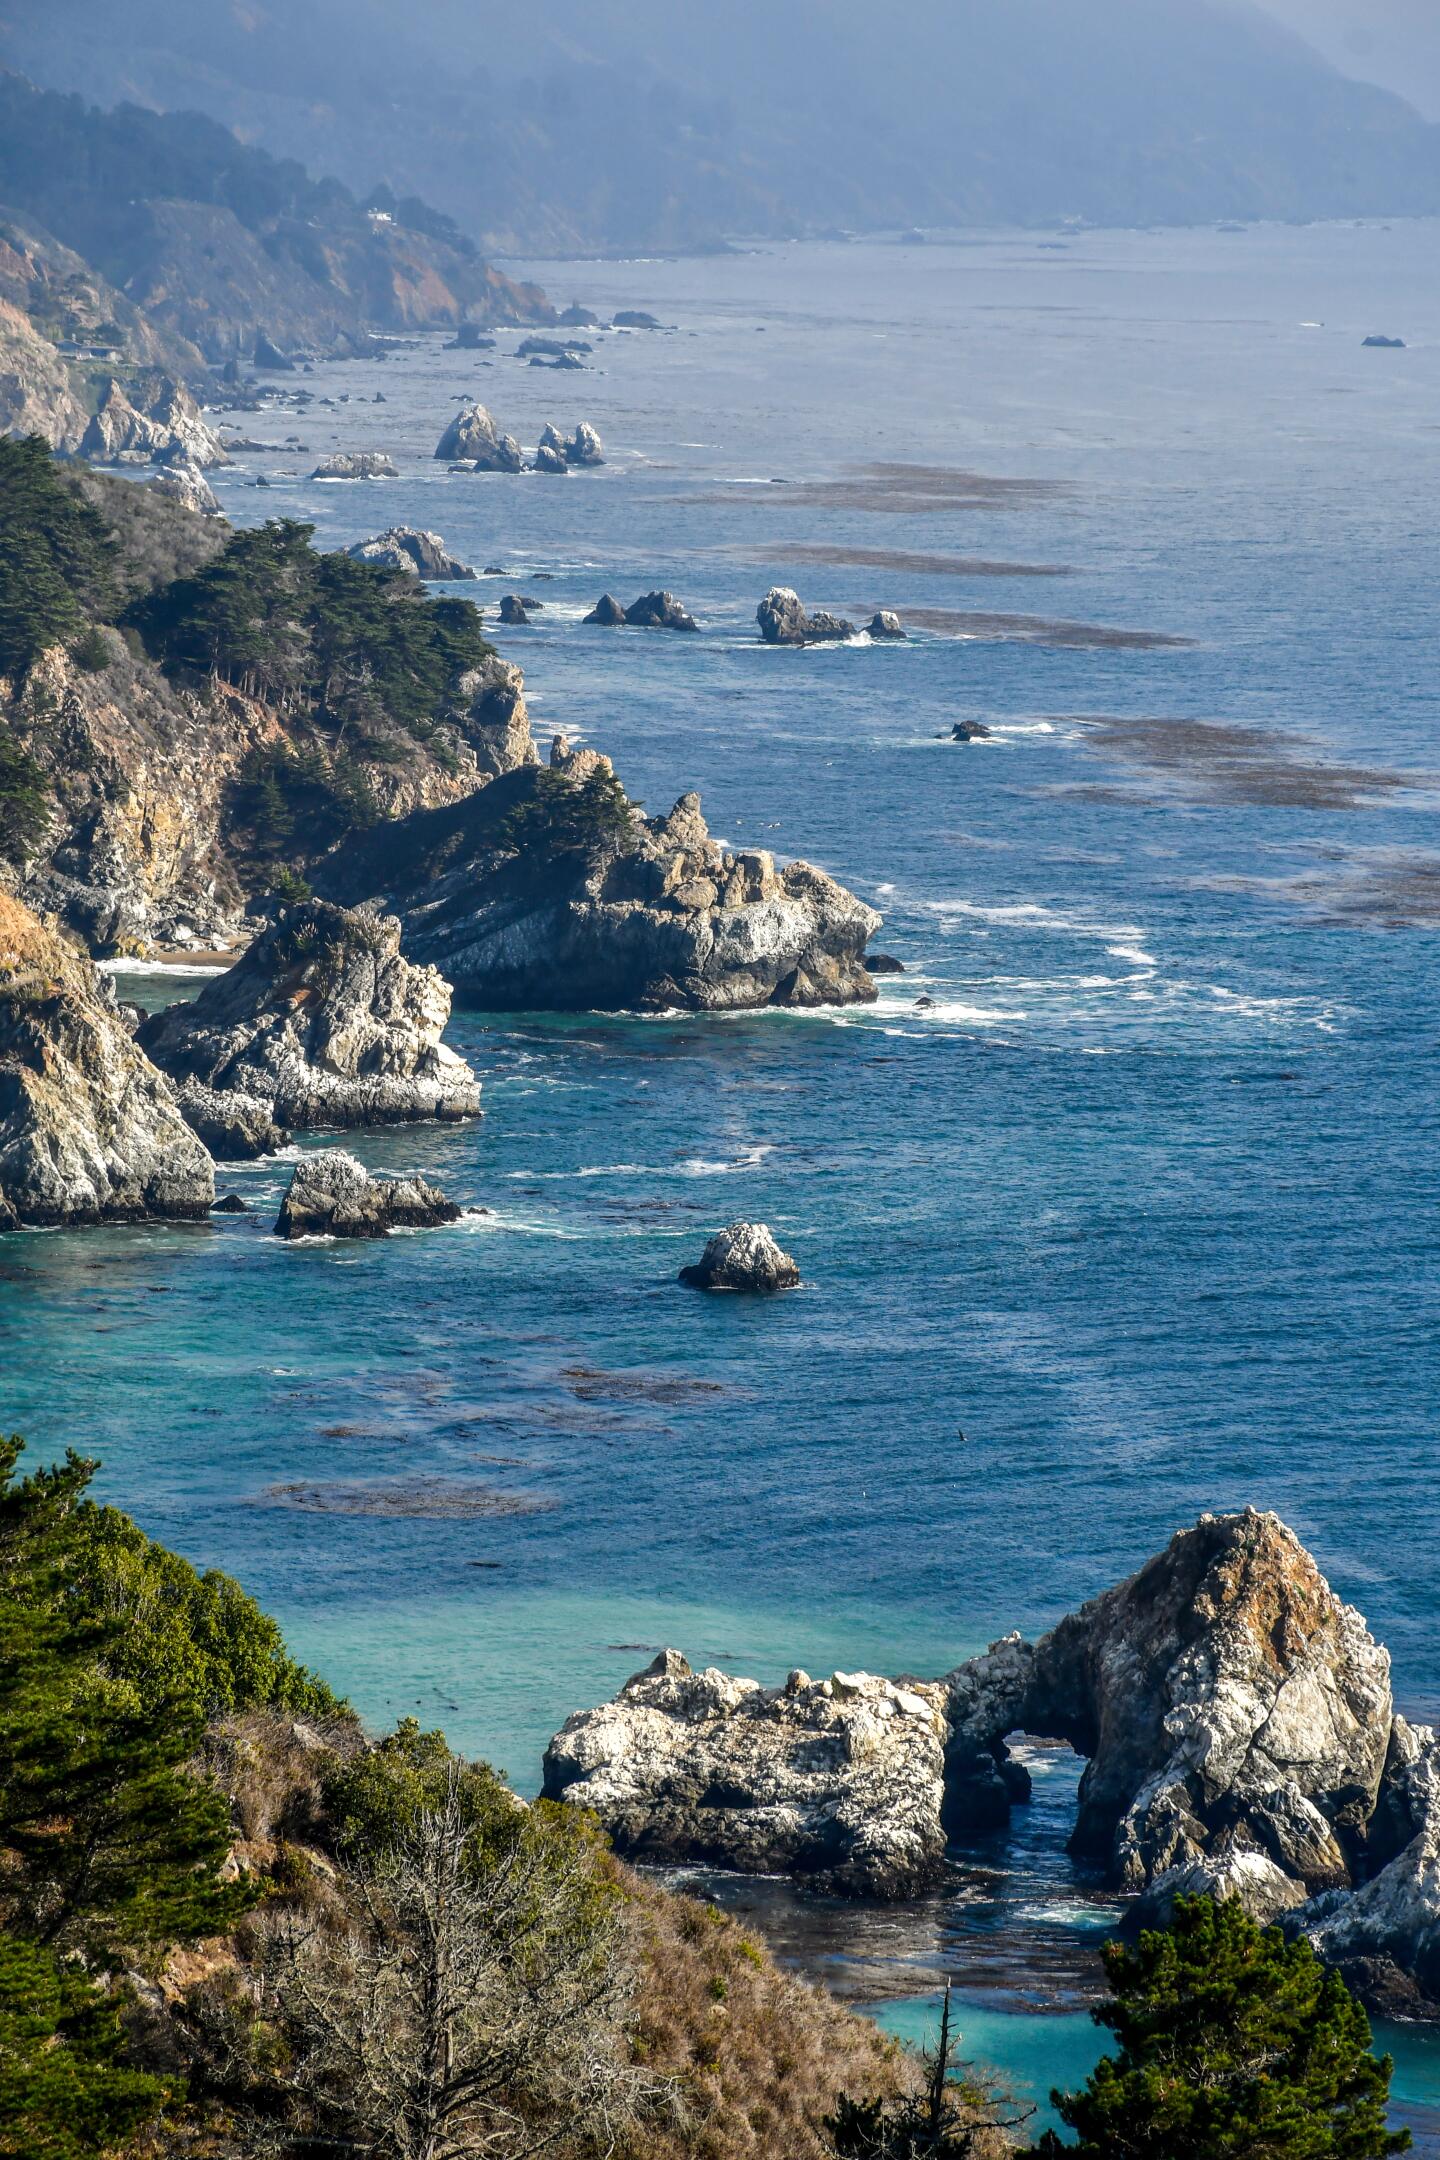 Big Sur travel: Where to stay, what to do, where to eat - Los Angeles Times